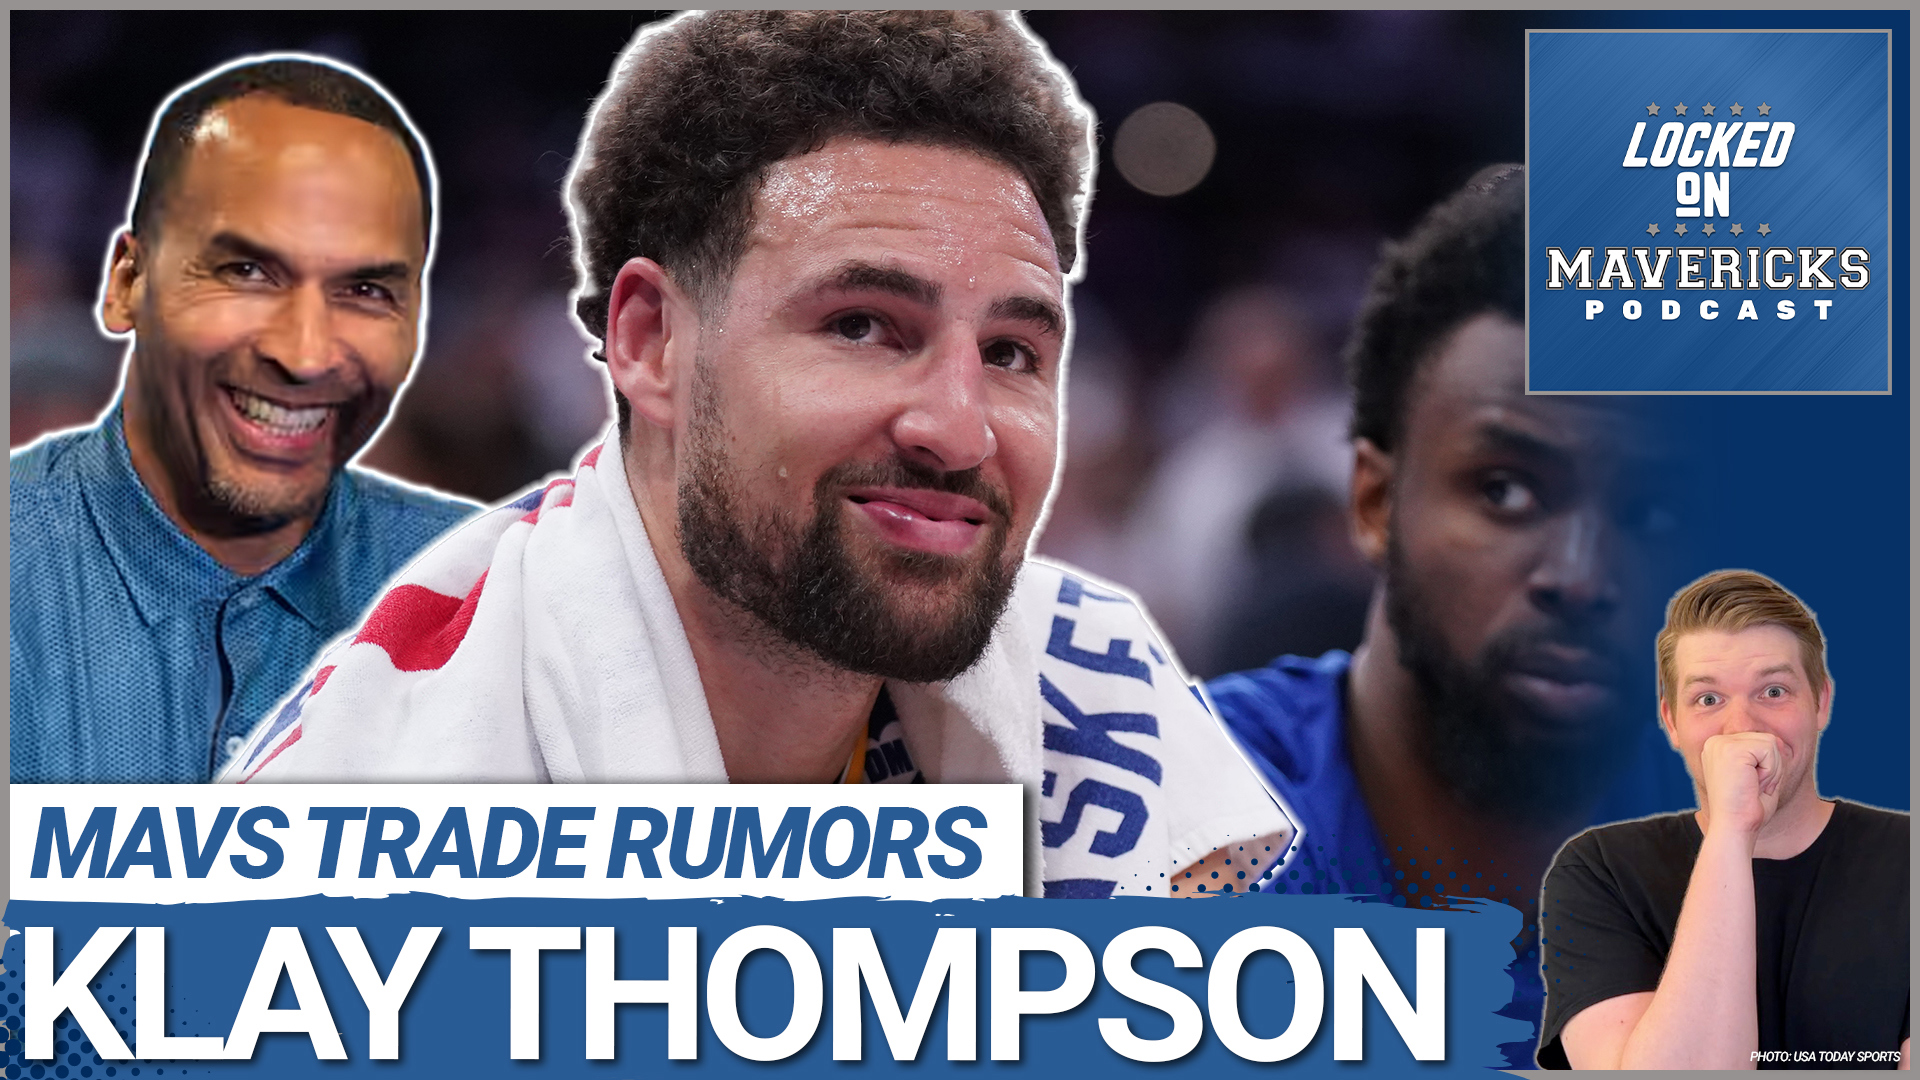 Nick Angstadt breaks down the Dallas Mavericks' recent trade for Klay Thompson and why it matters for the Mavs that Nico Harrison got this done.